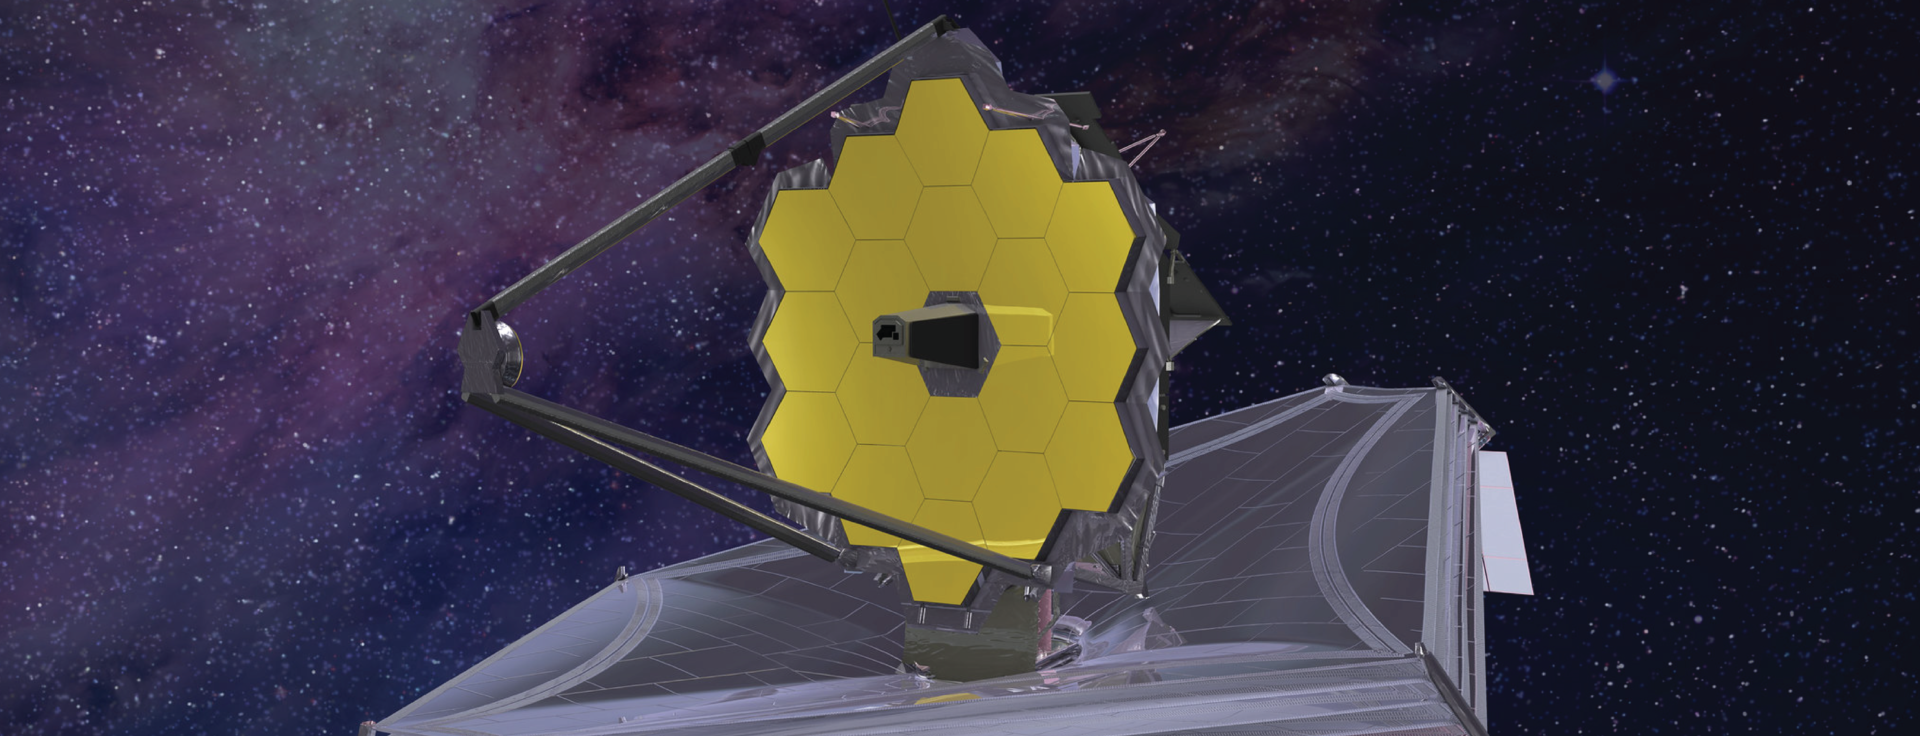 Telescope in space with gold plated hexagon mirrors